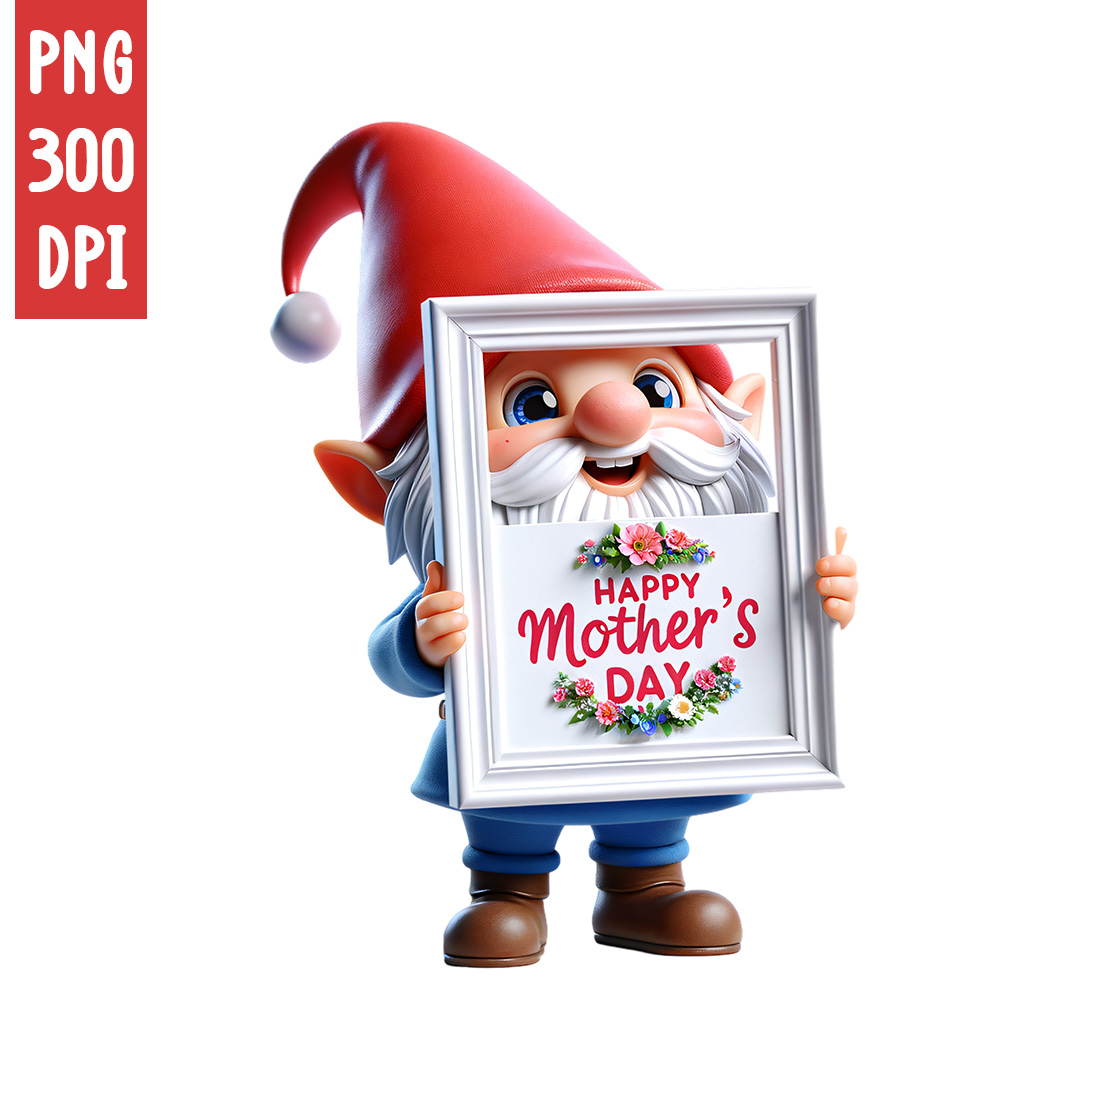 Mother's Day Clipart | Cute Gnome with frame clipart | PNG cover image.